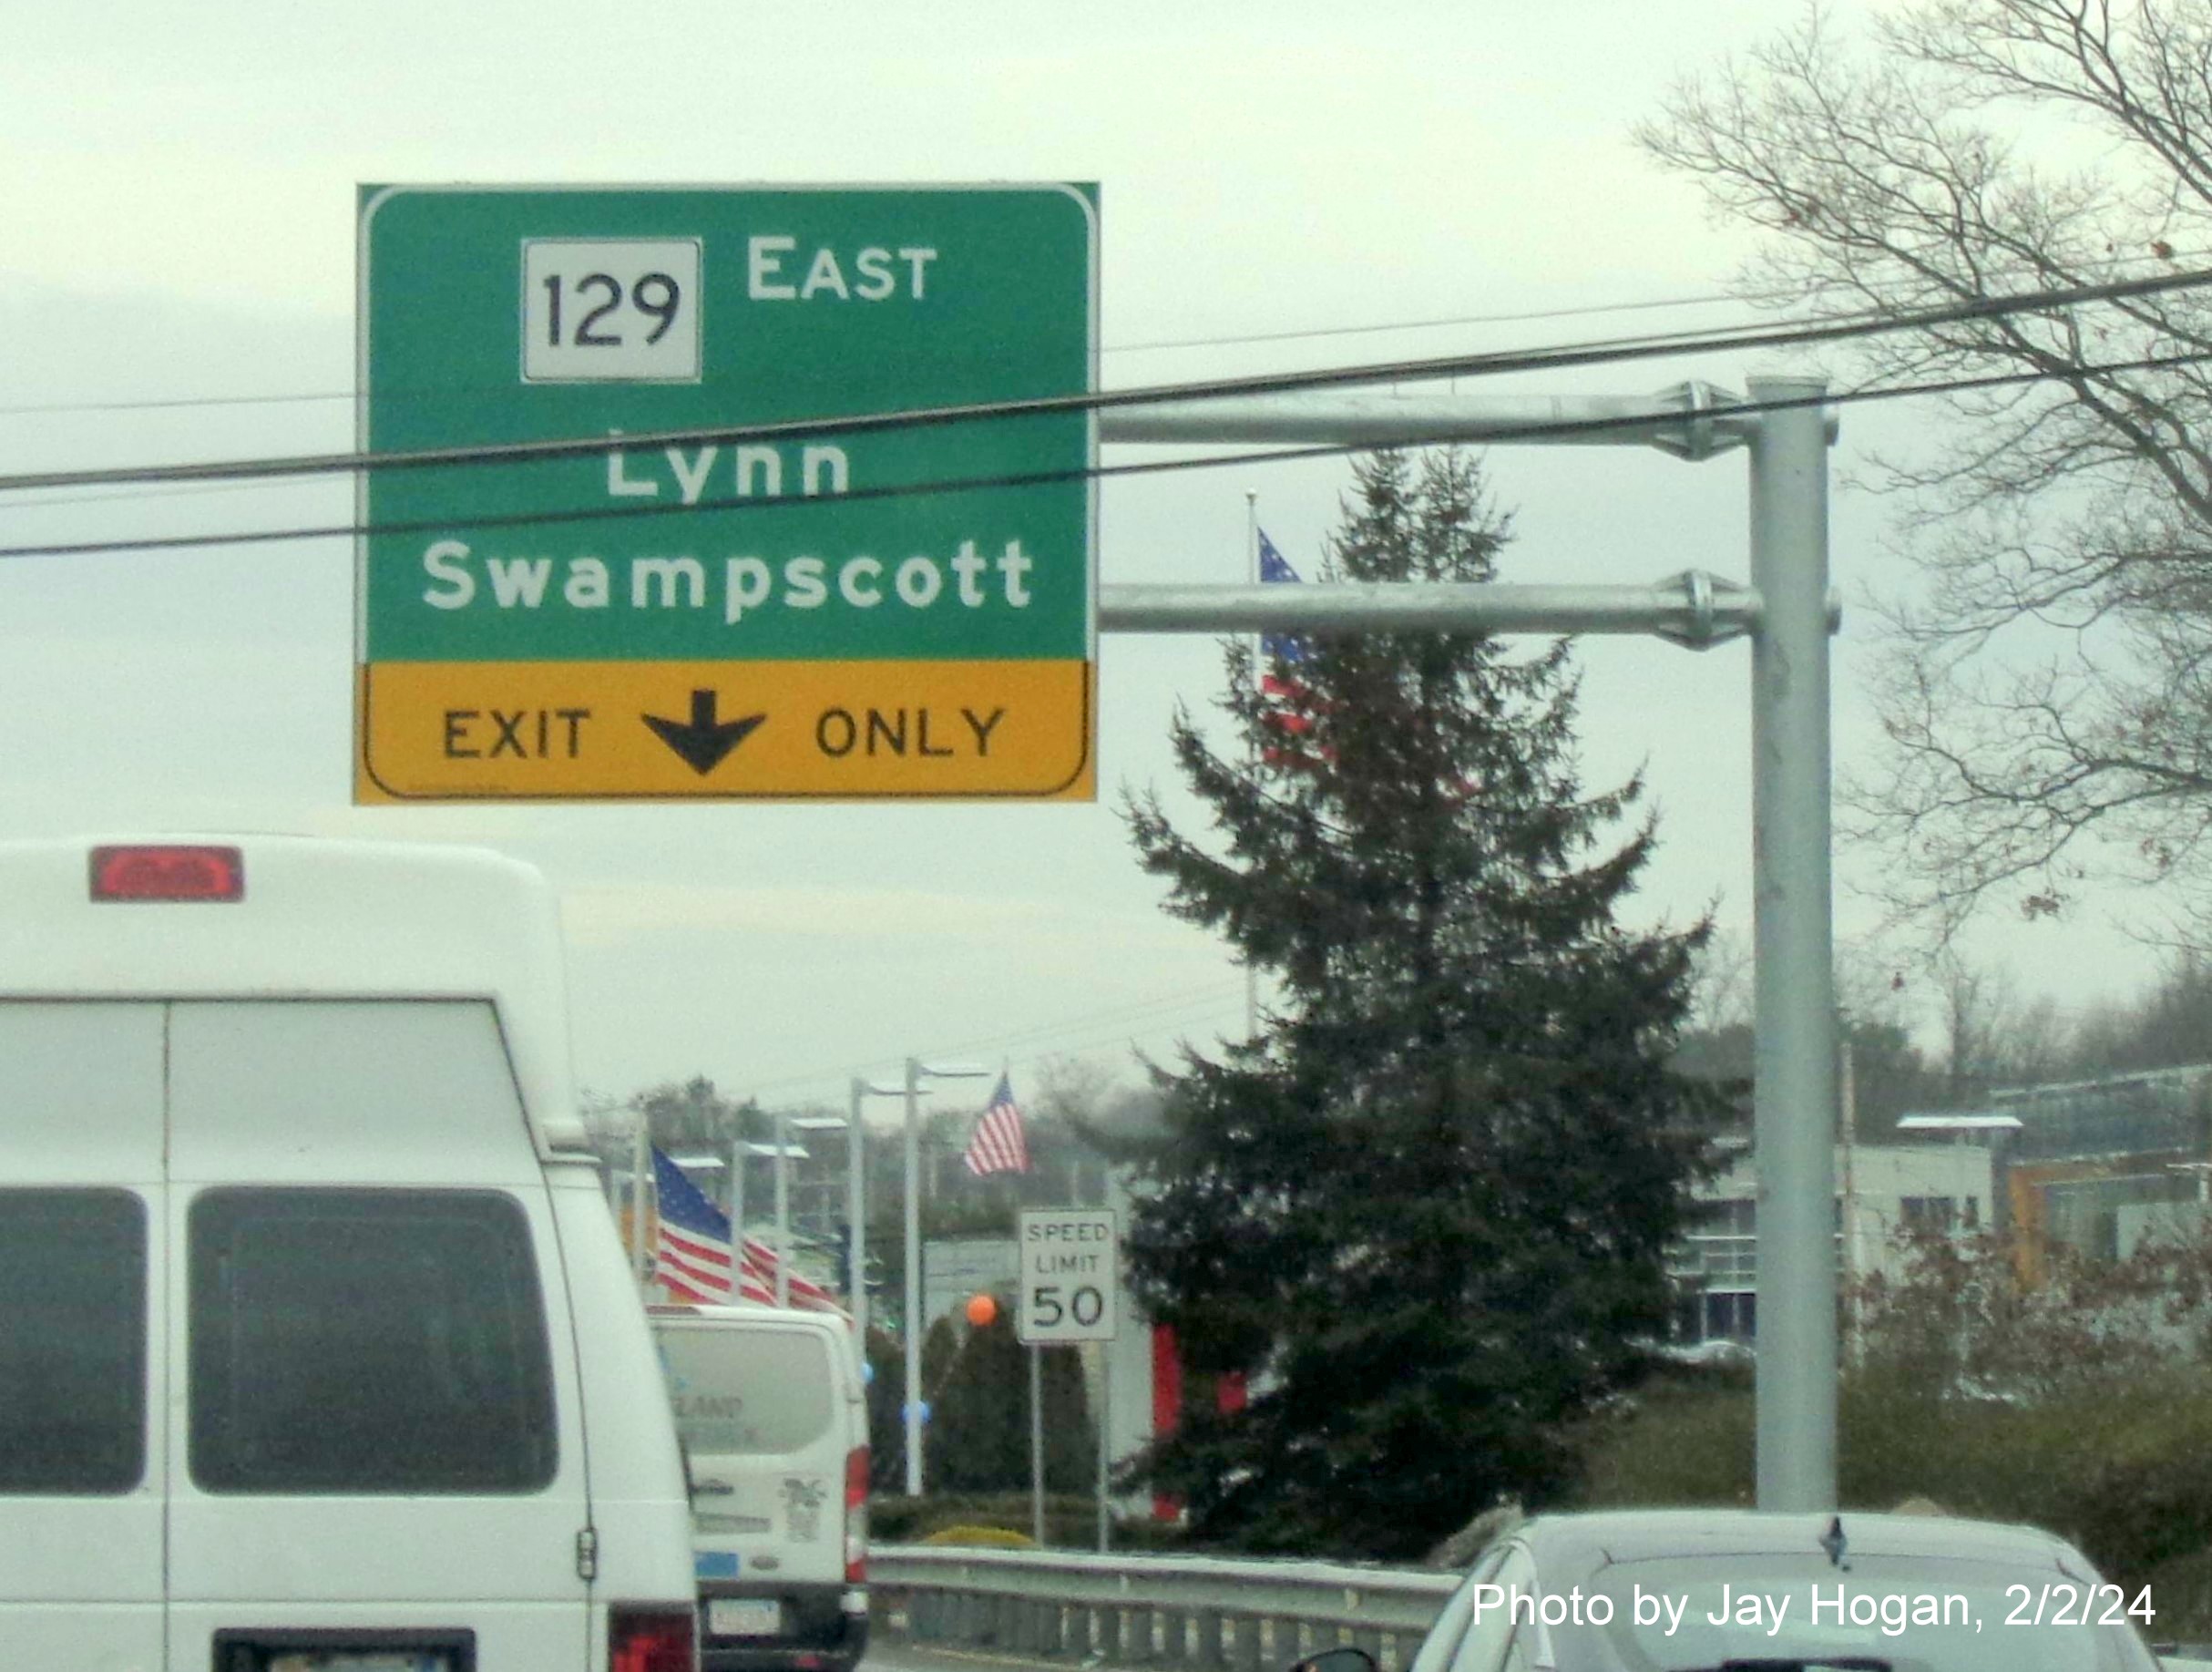 Image of recently placed advance sign for MA 129 East exit on US 1 North in Lynnfield, by Kevin Manfra, February 2024